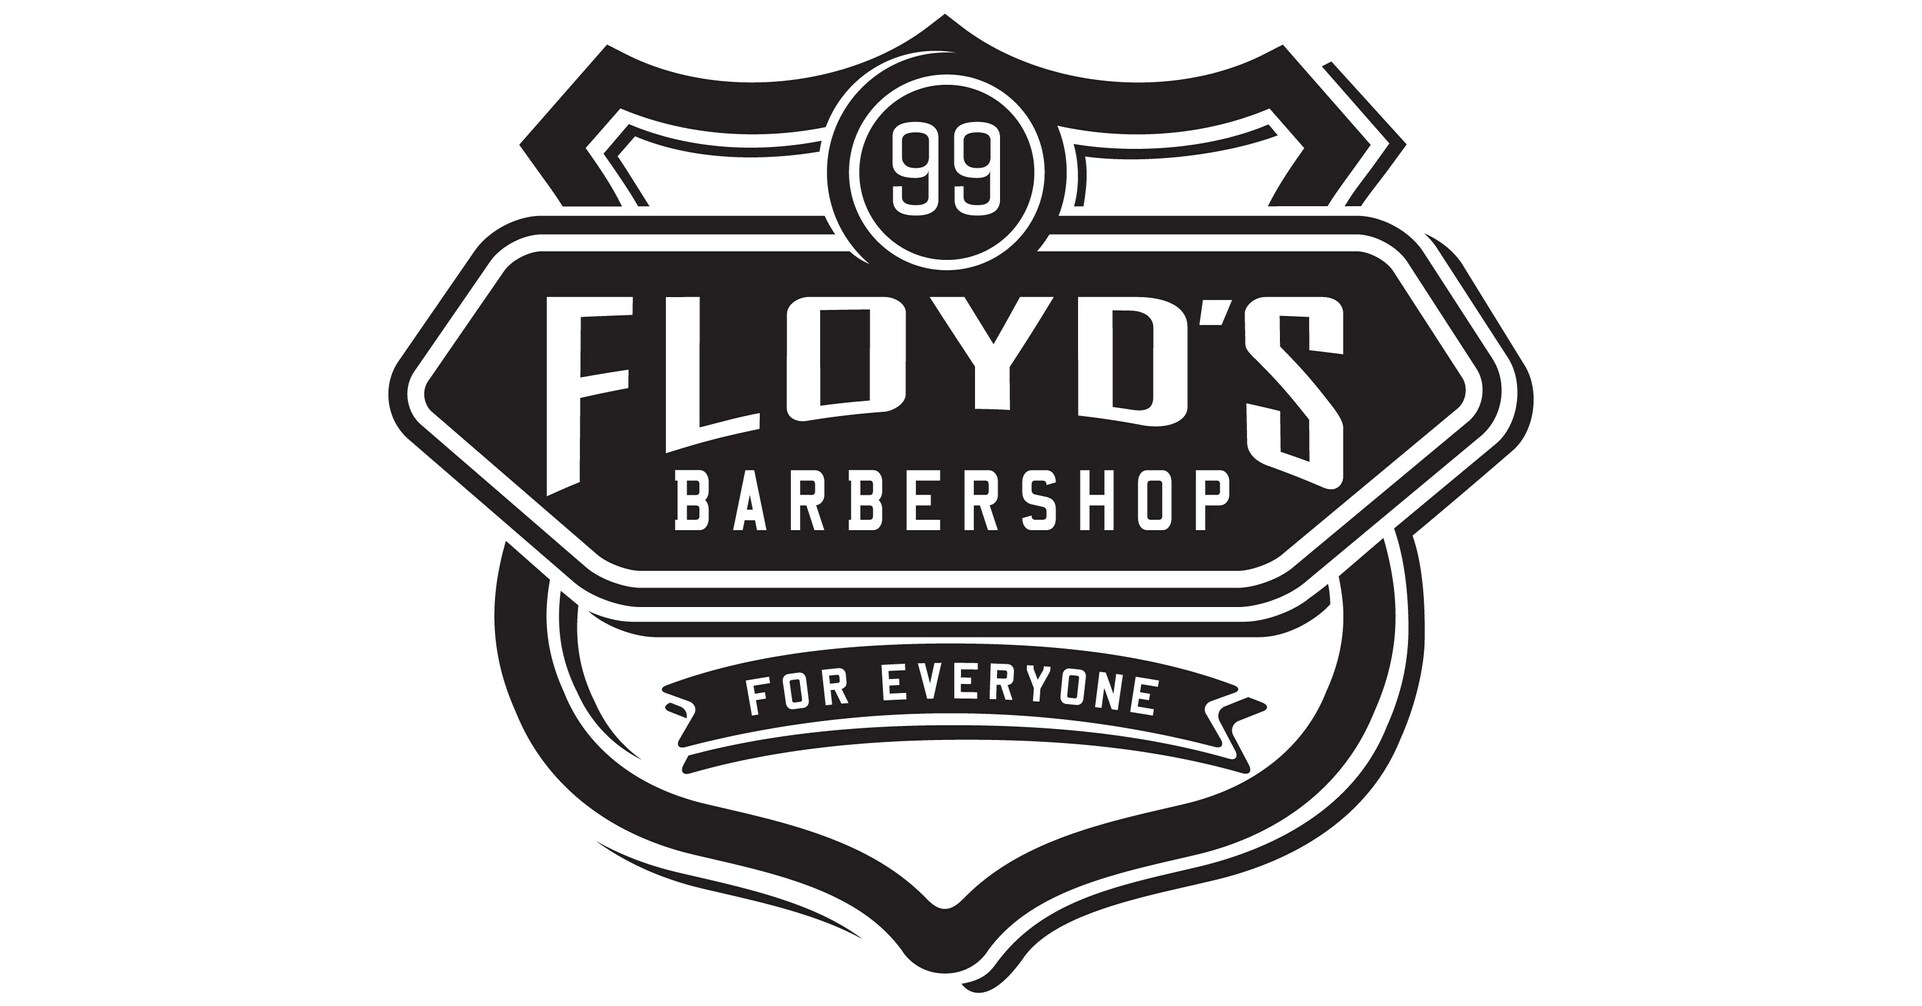 Floyd’s 99 Barbershop Opens Second Shop in Lexington; Celebrates Grand Opening on January 11